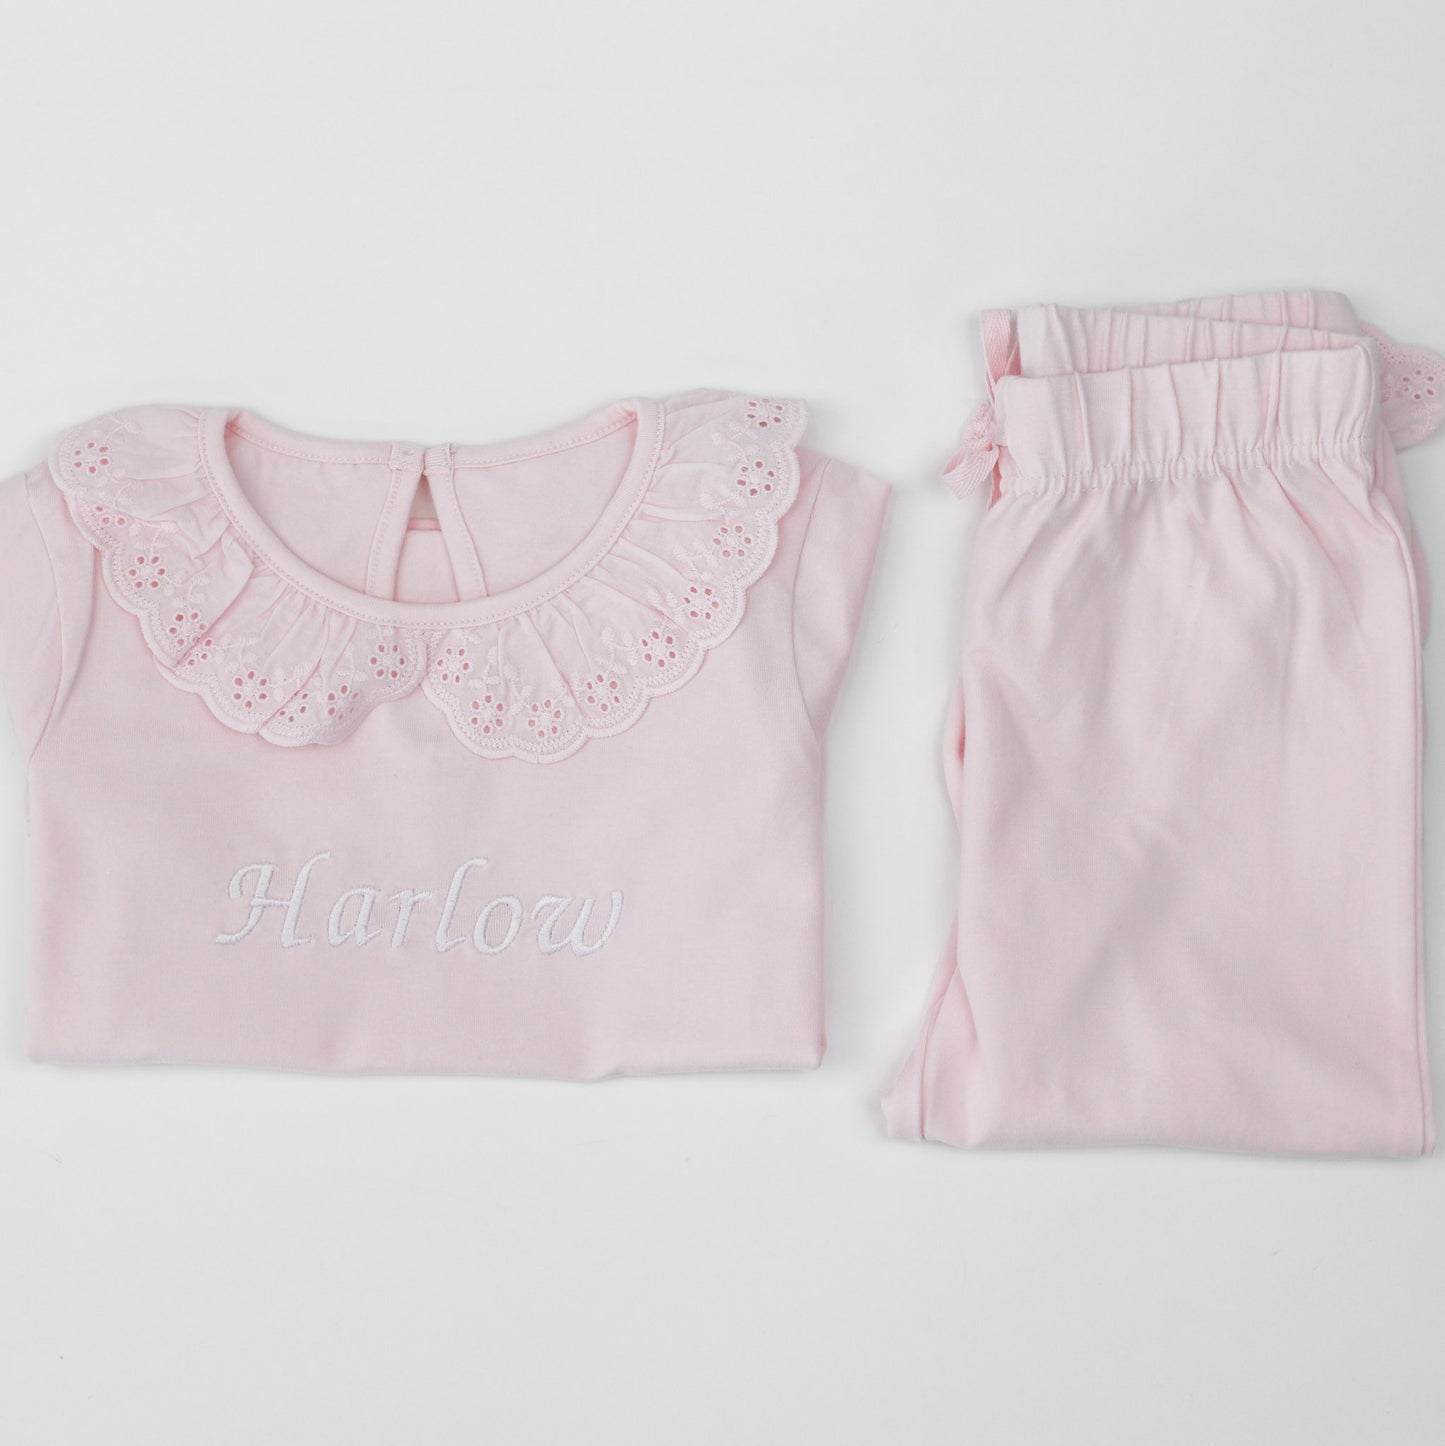 Embroidered Frilly Pj's